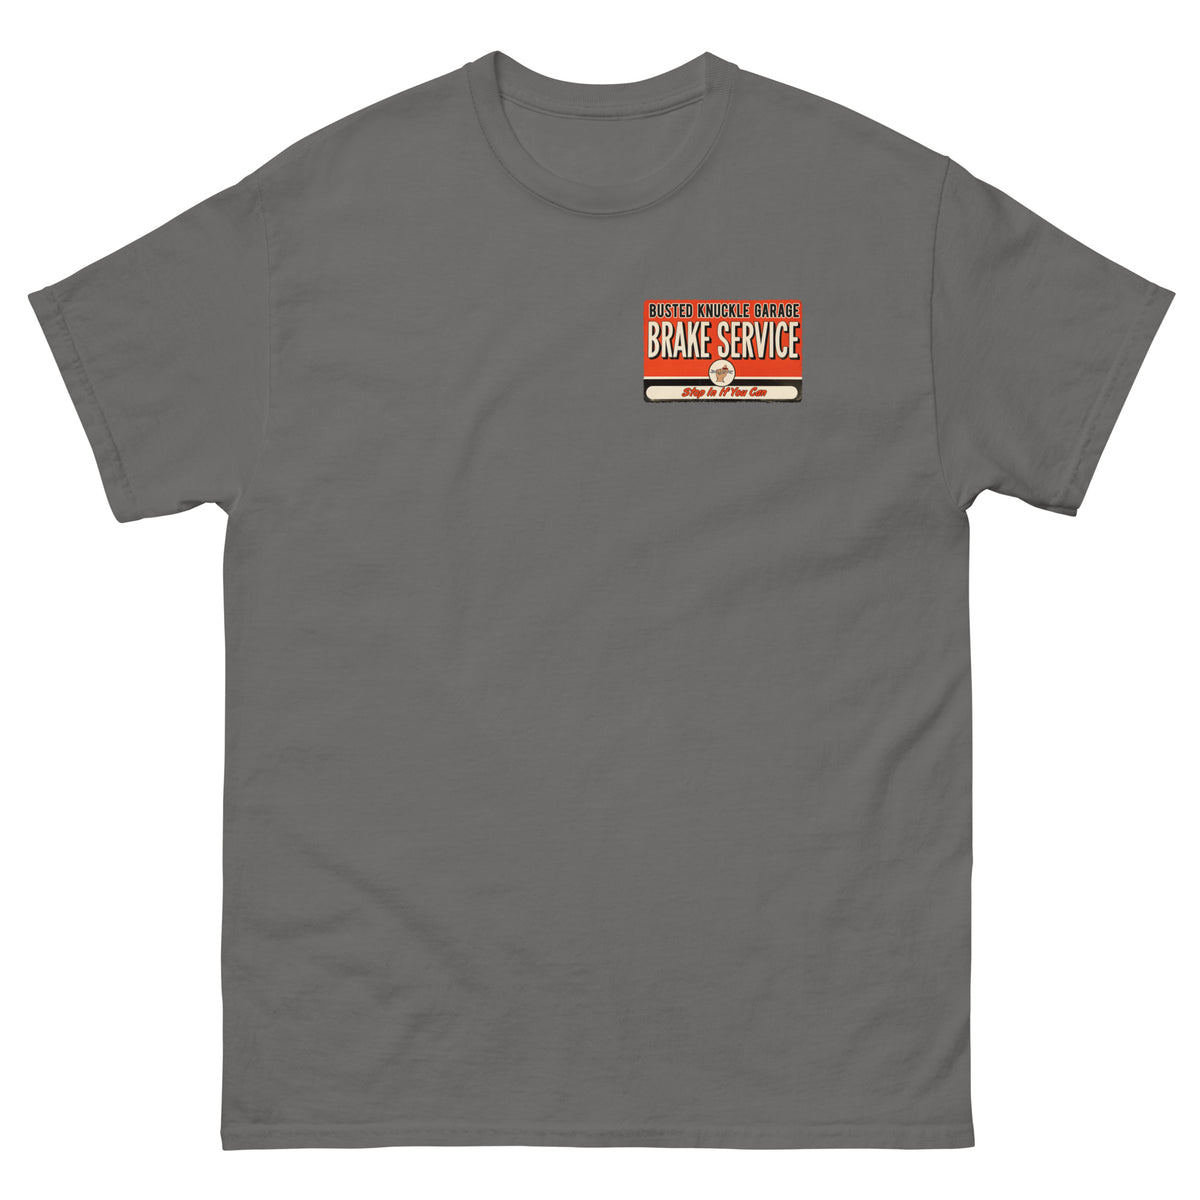 Busted Knuckle Garage Carguy Brake-Service Two-Sided Car Guy T-Shirt